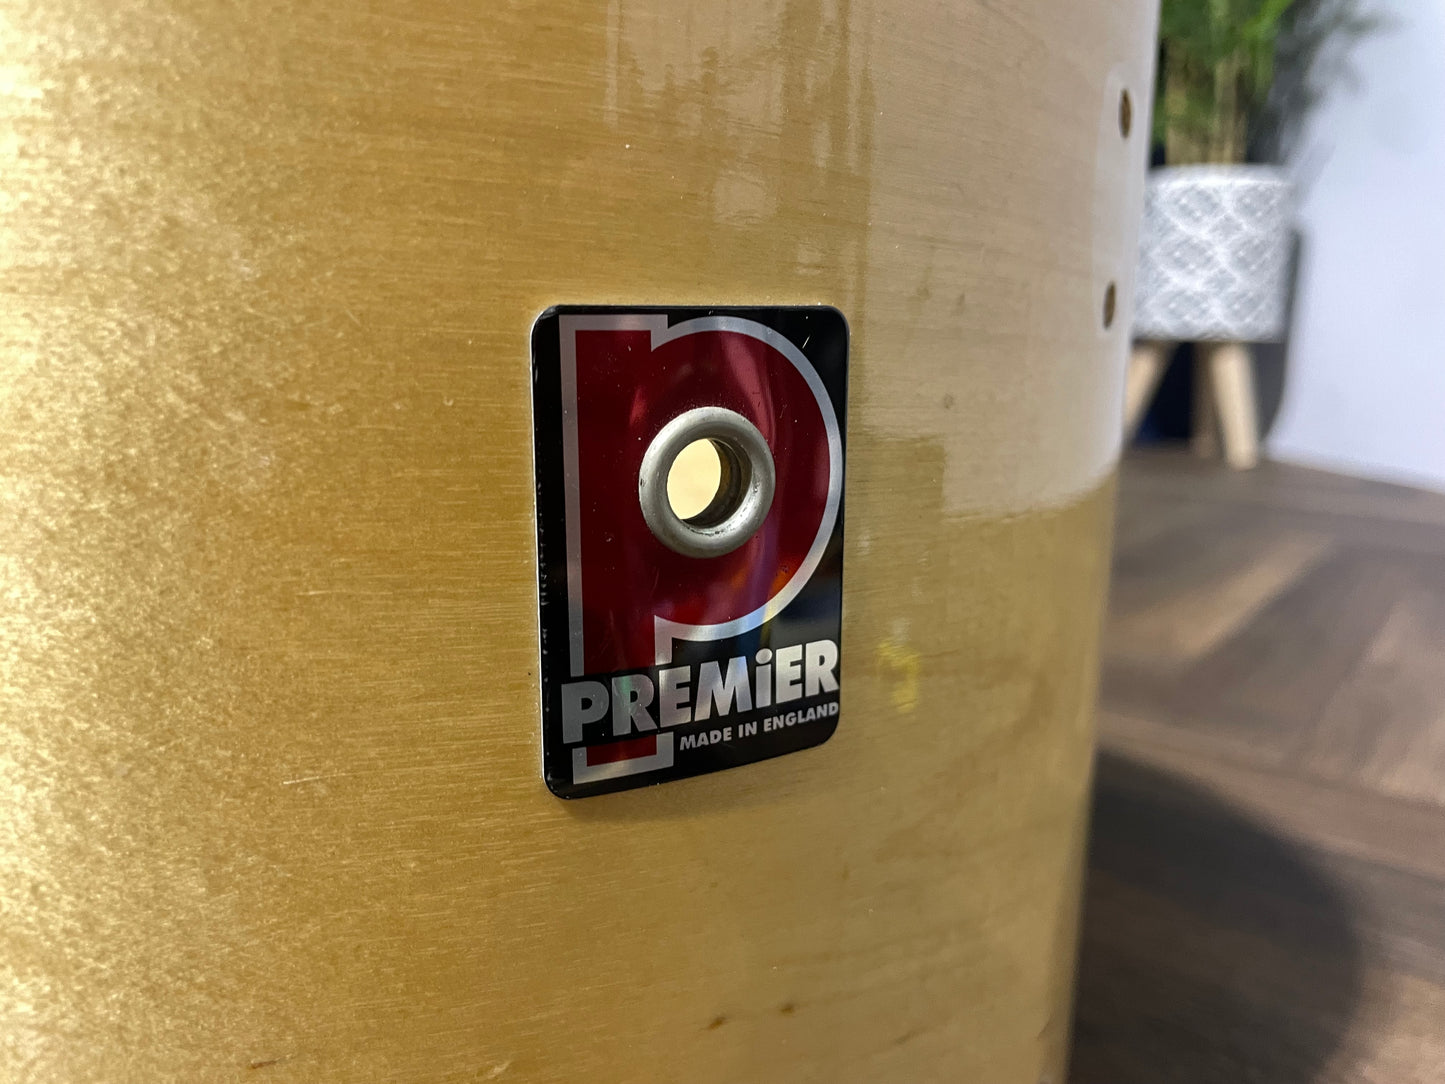 Premier XPK Tom Drum Shell 12”x10” Bare Wood Project #KF56